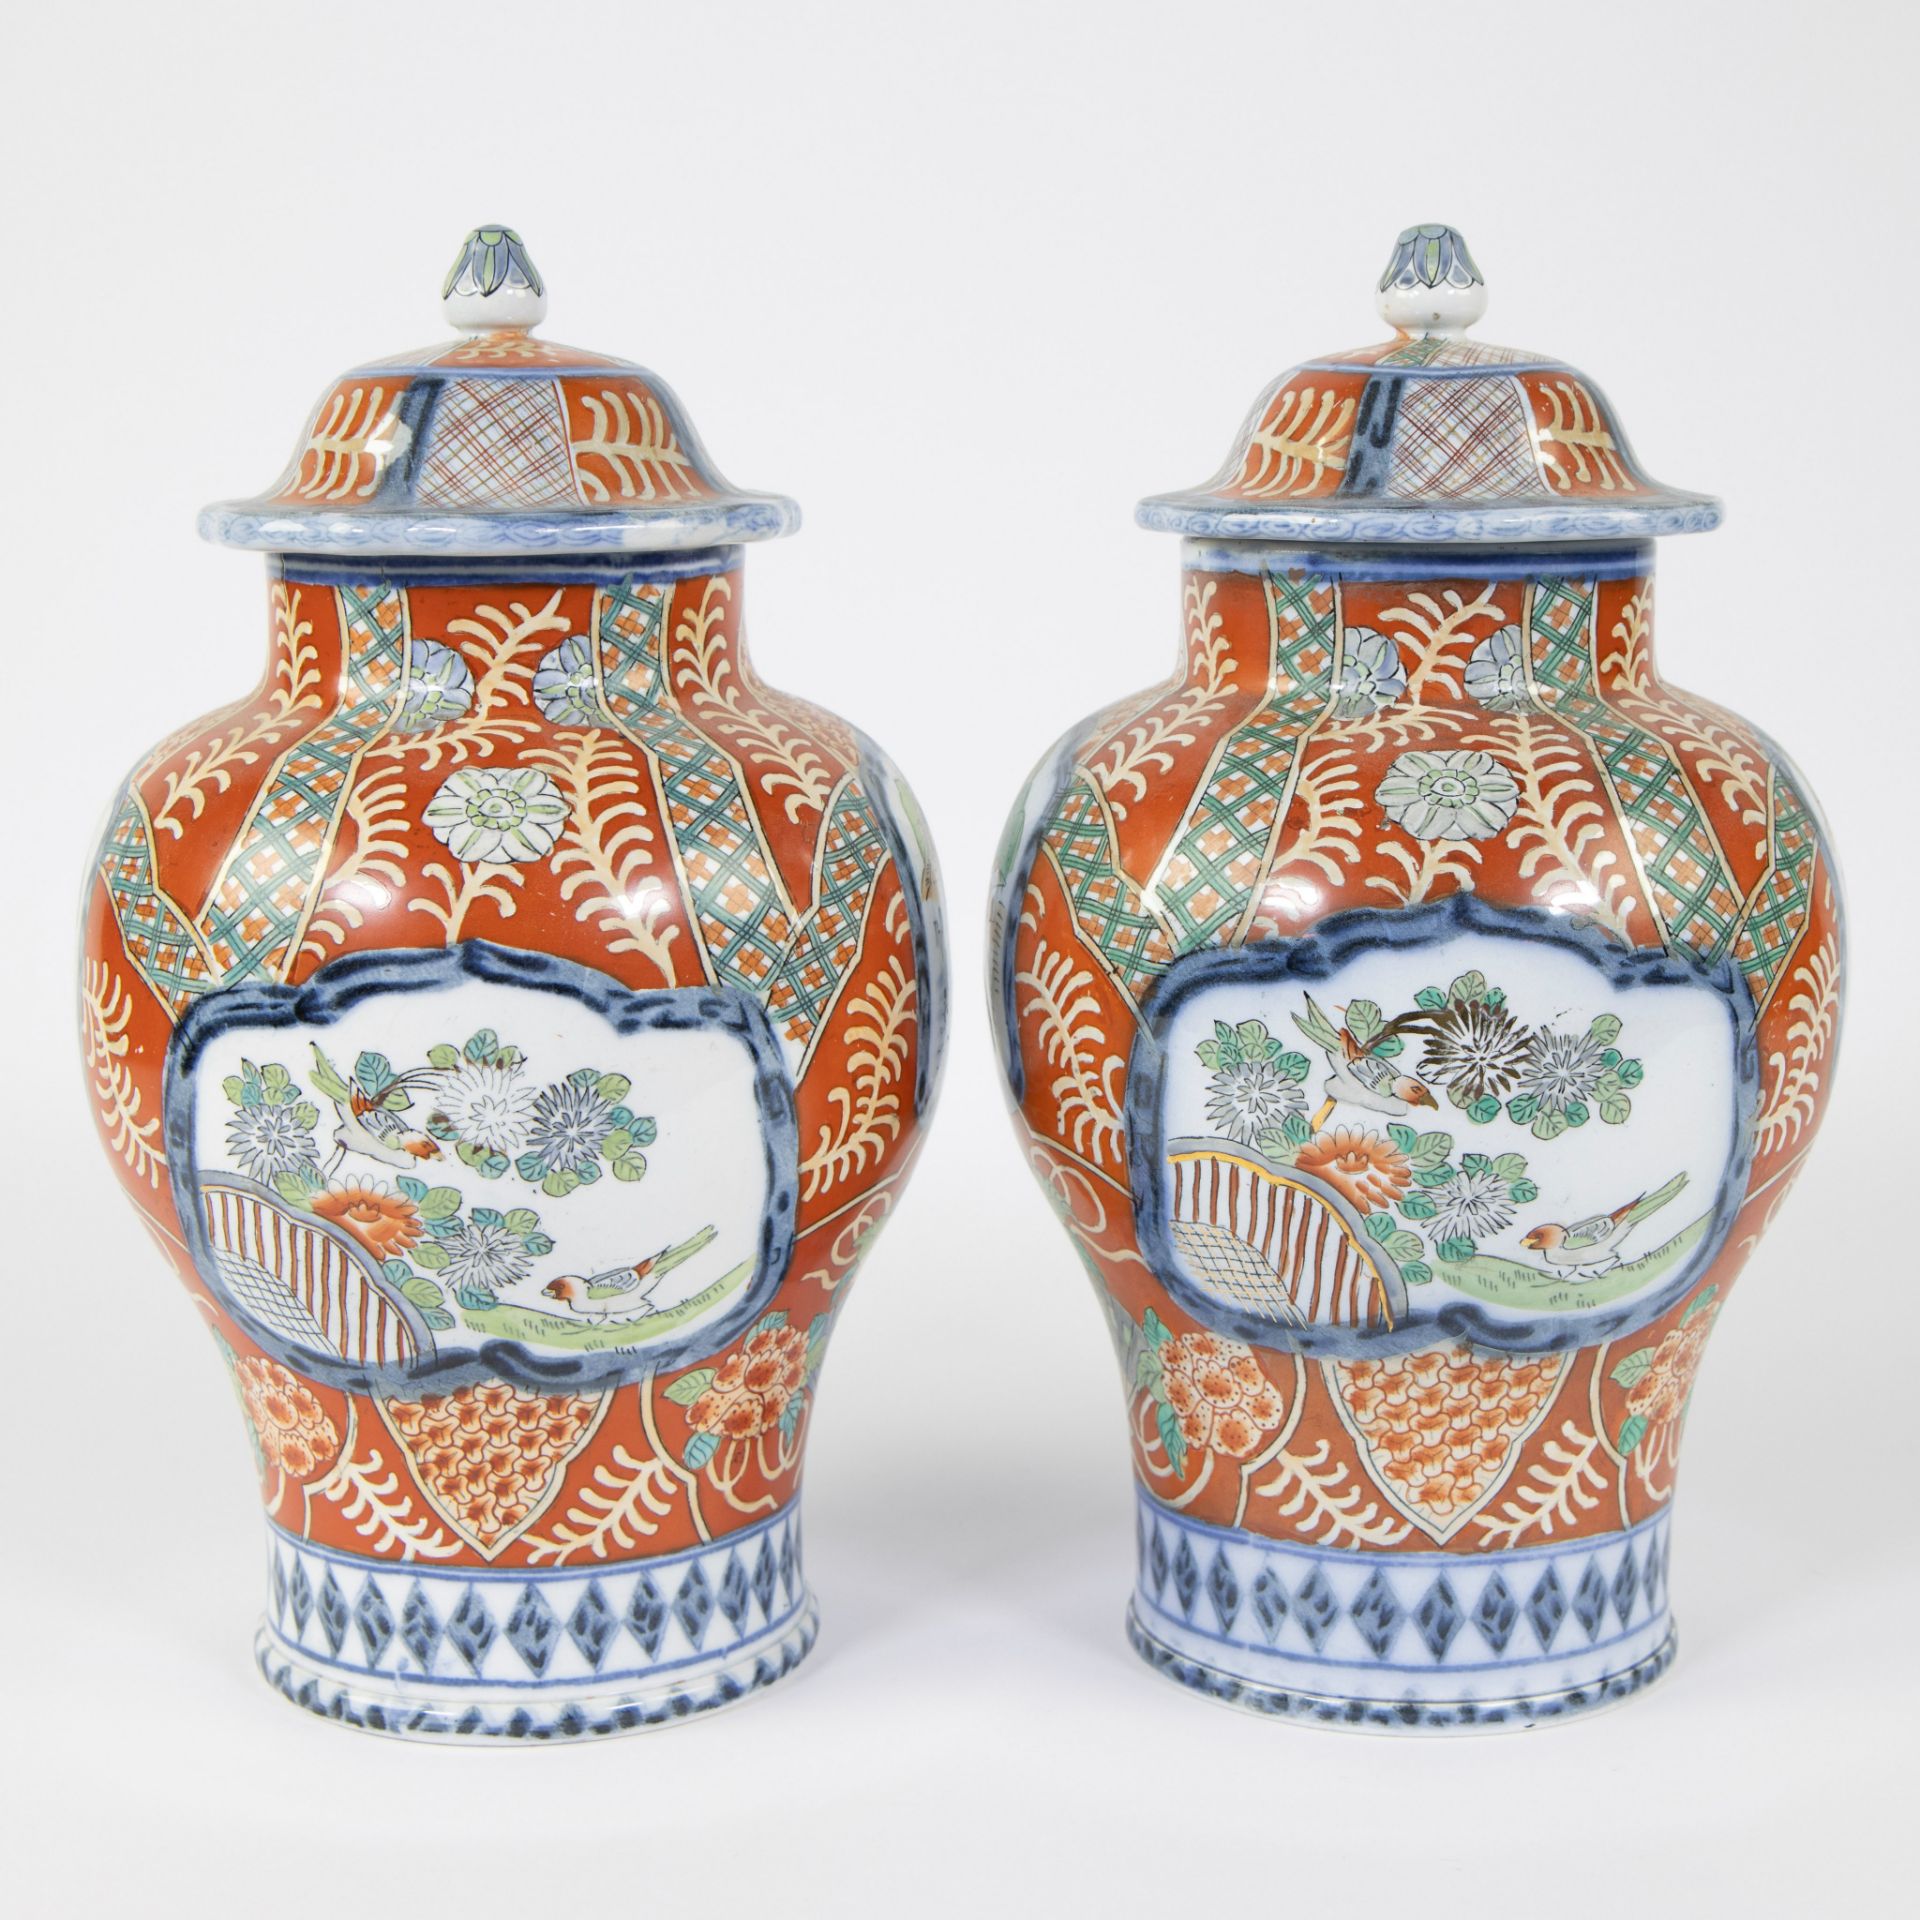 Pair of lidded vases P. Regout & Co, Maastricht, marked - Image 3 of 7